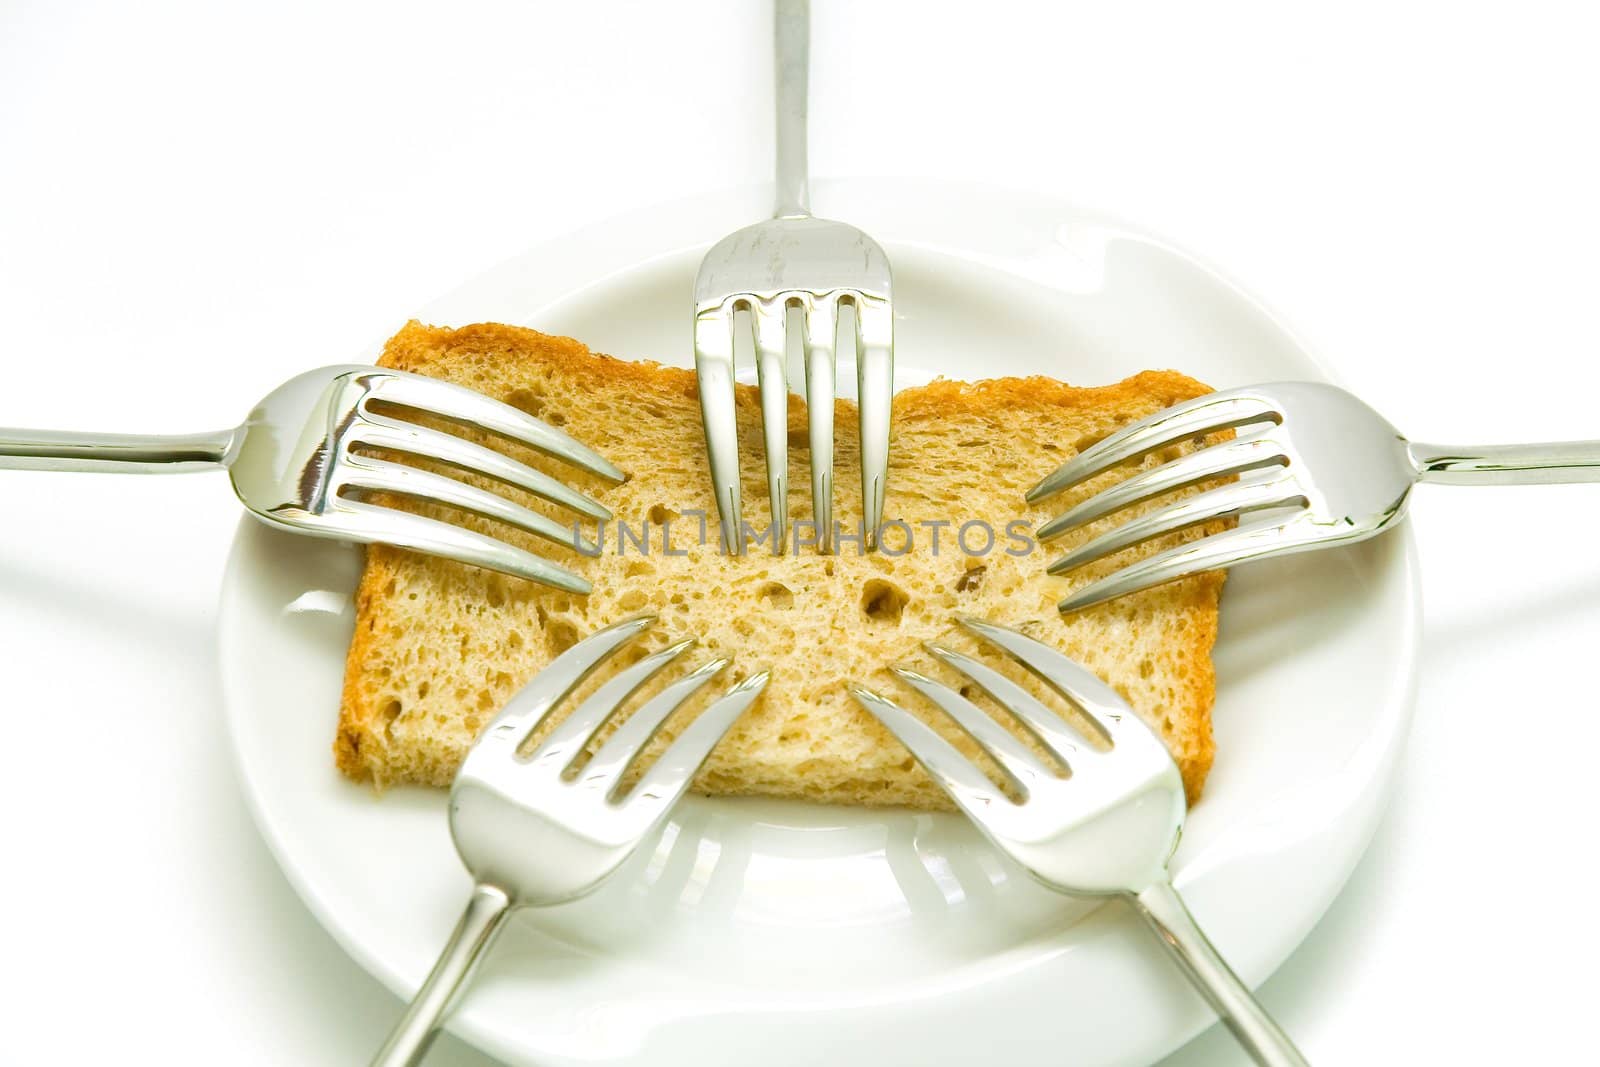 Forks and bread by Vladimir